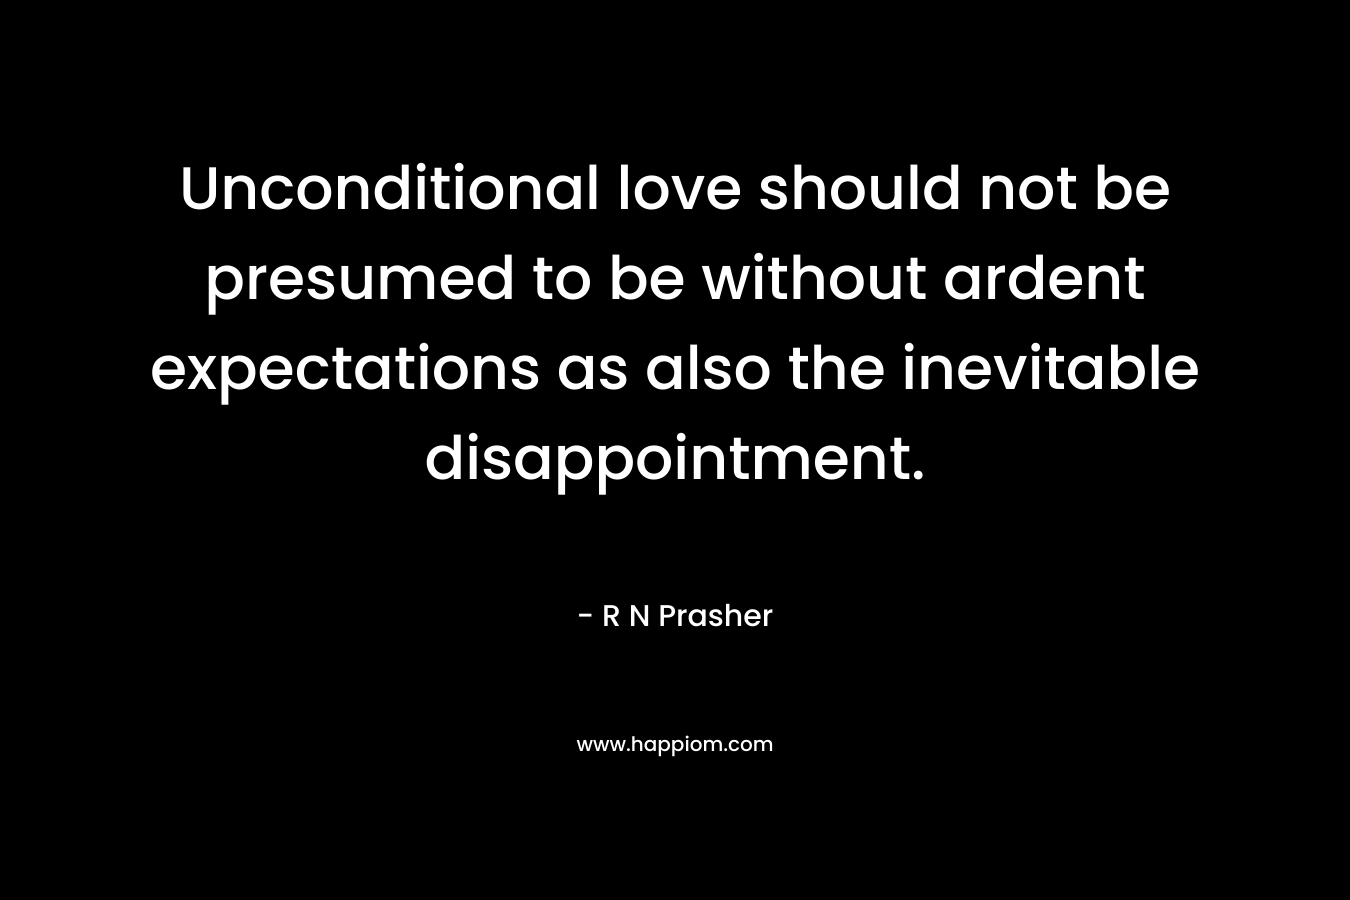 Unconditional love should not be presumed to be without ardent expectations as also the inevitable disappointment. – R N Prasher